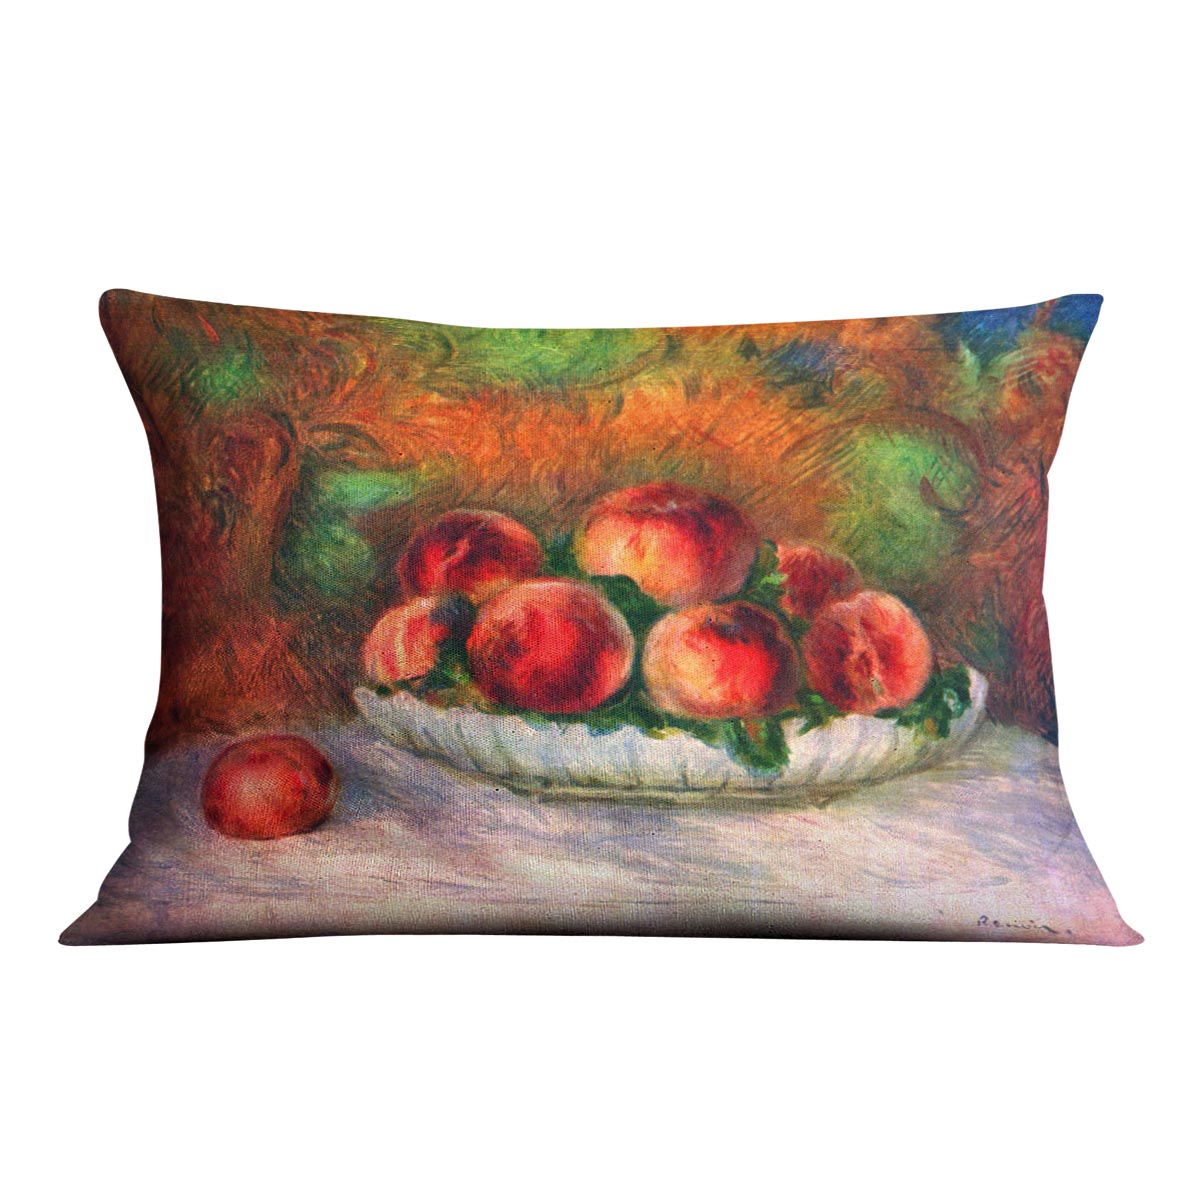 Still life with fruits by Renoir Cushion